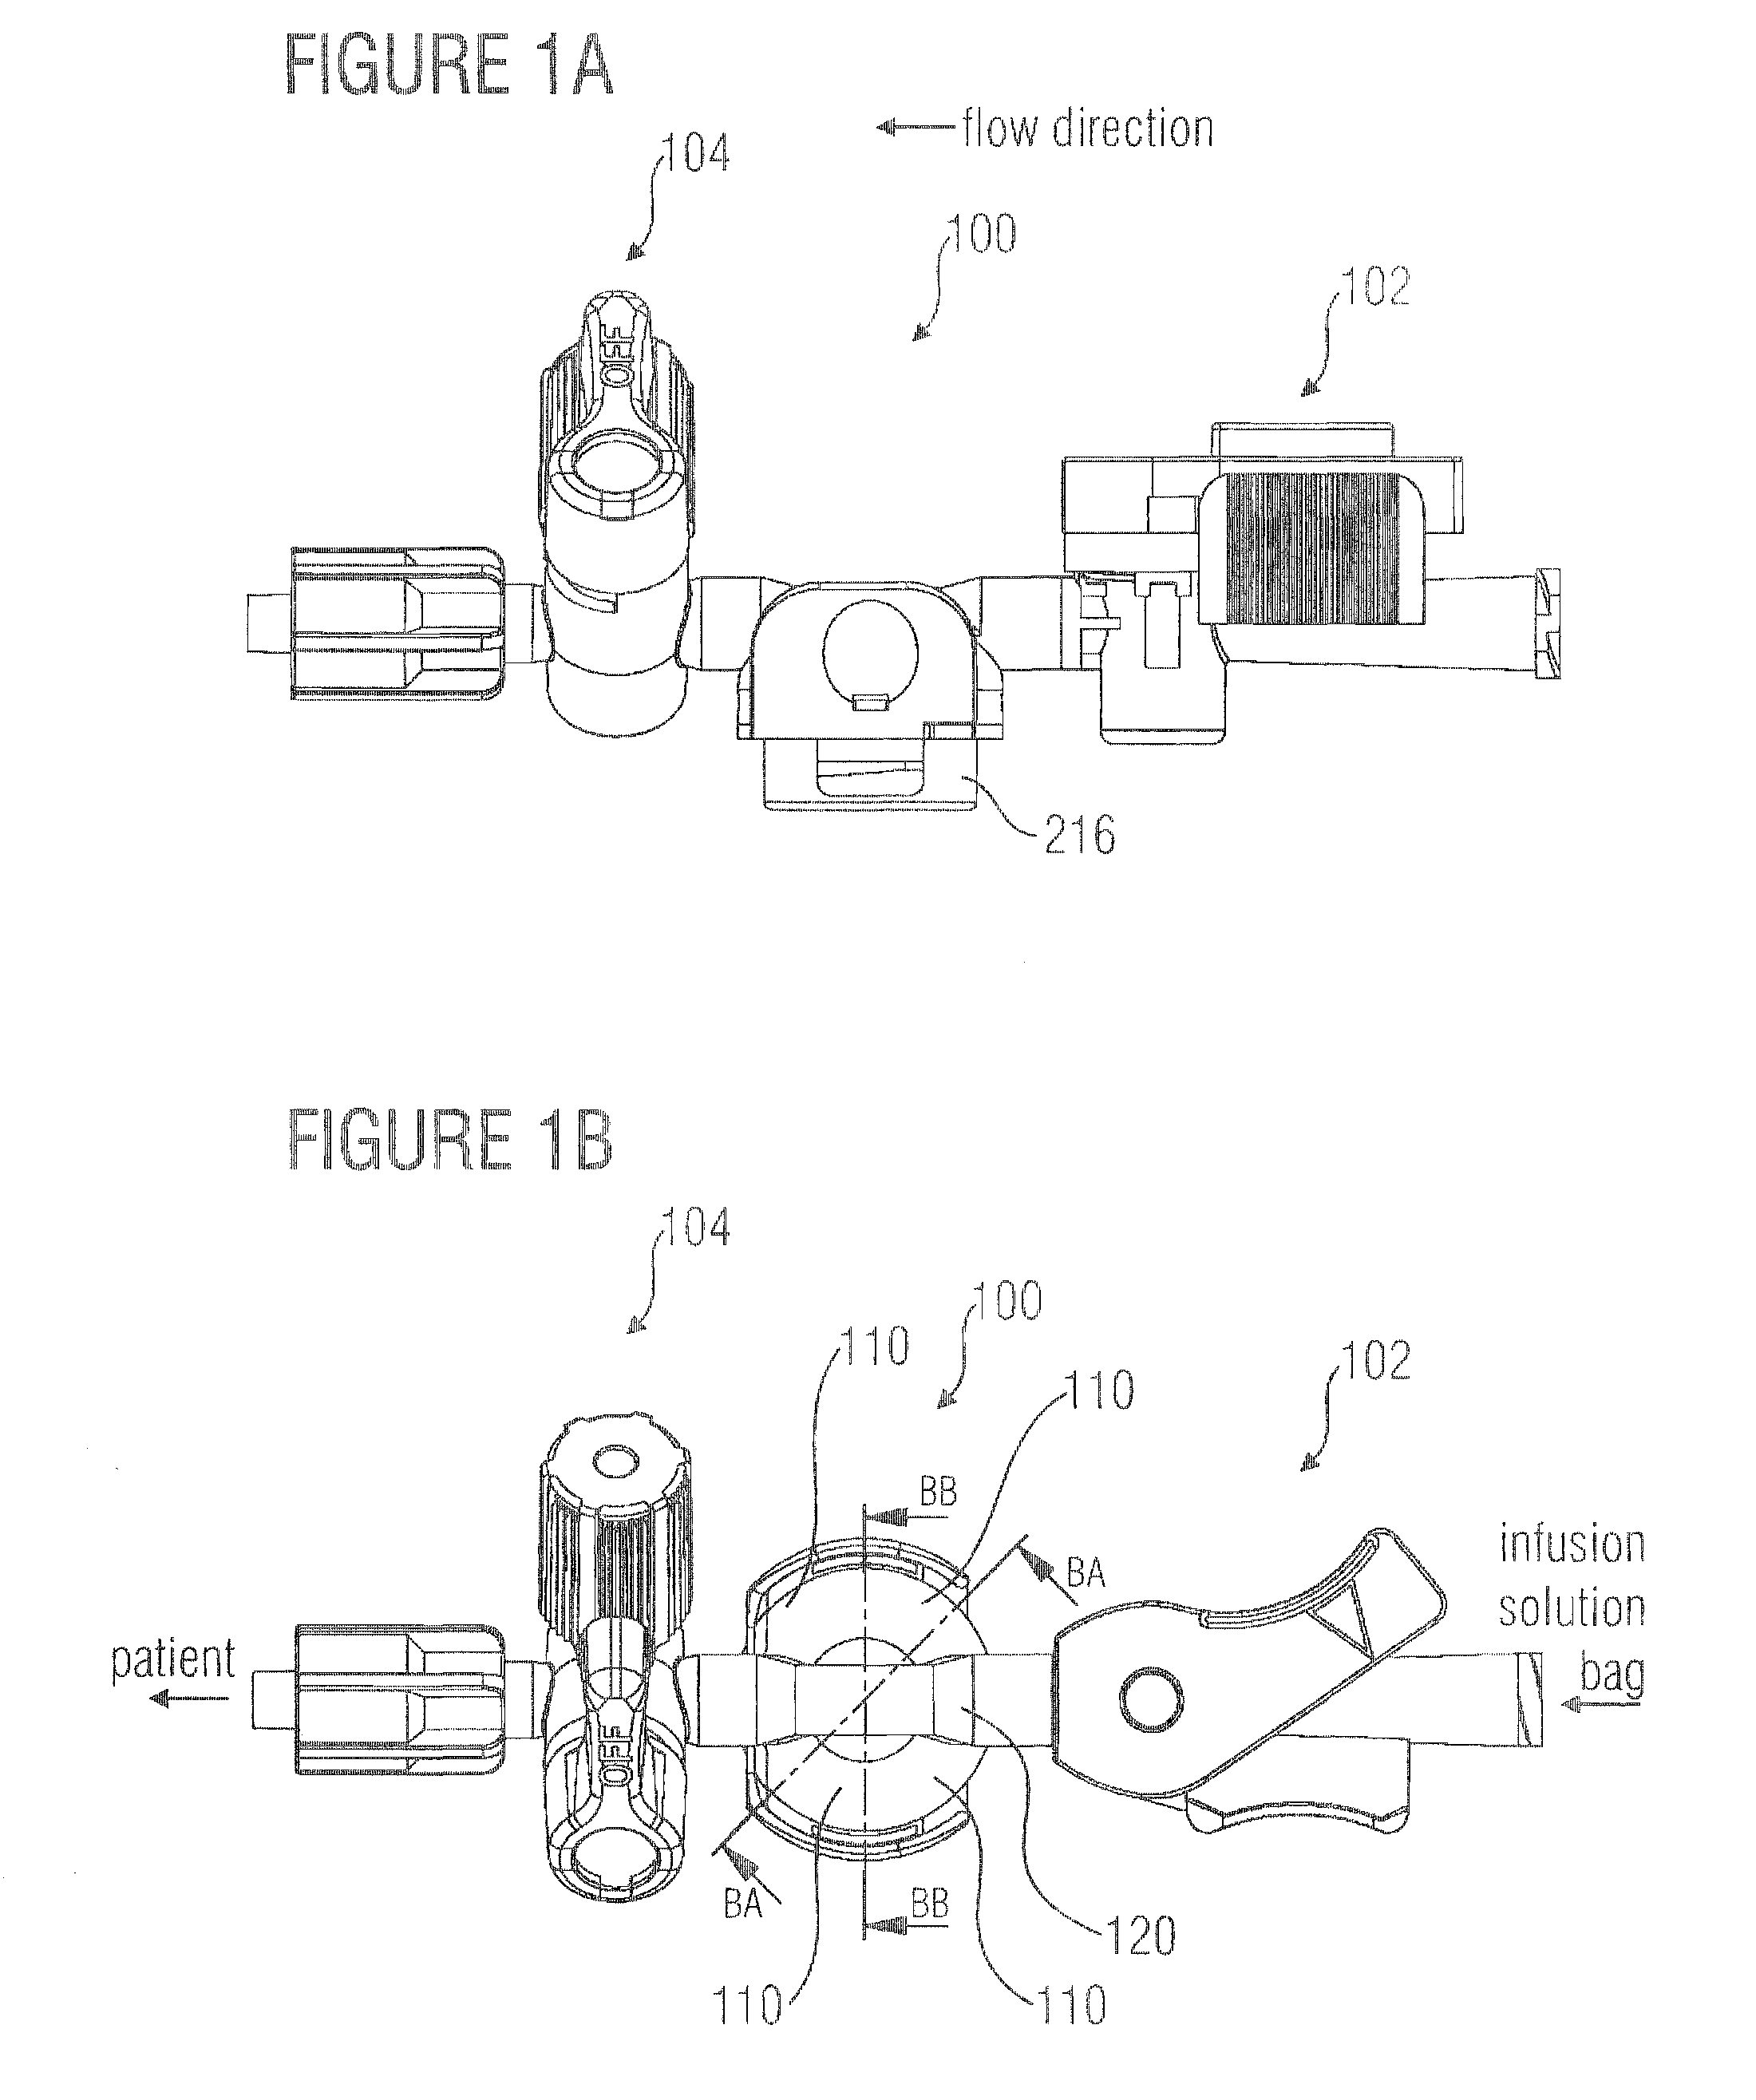 Method for manufacturing a fluid pressure measurement unit and a component for being used in a fluid pressure measurement unit